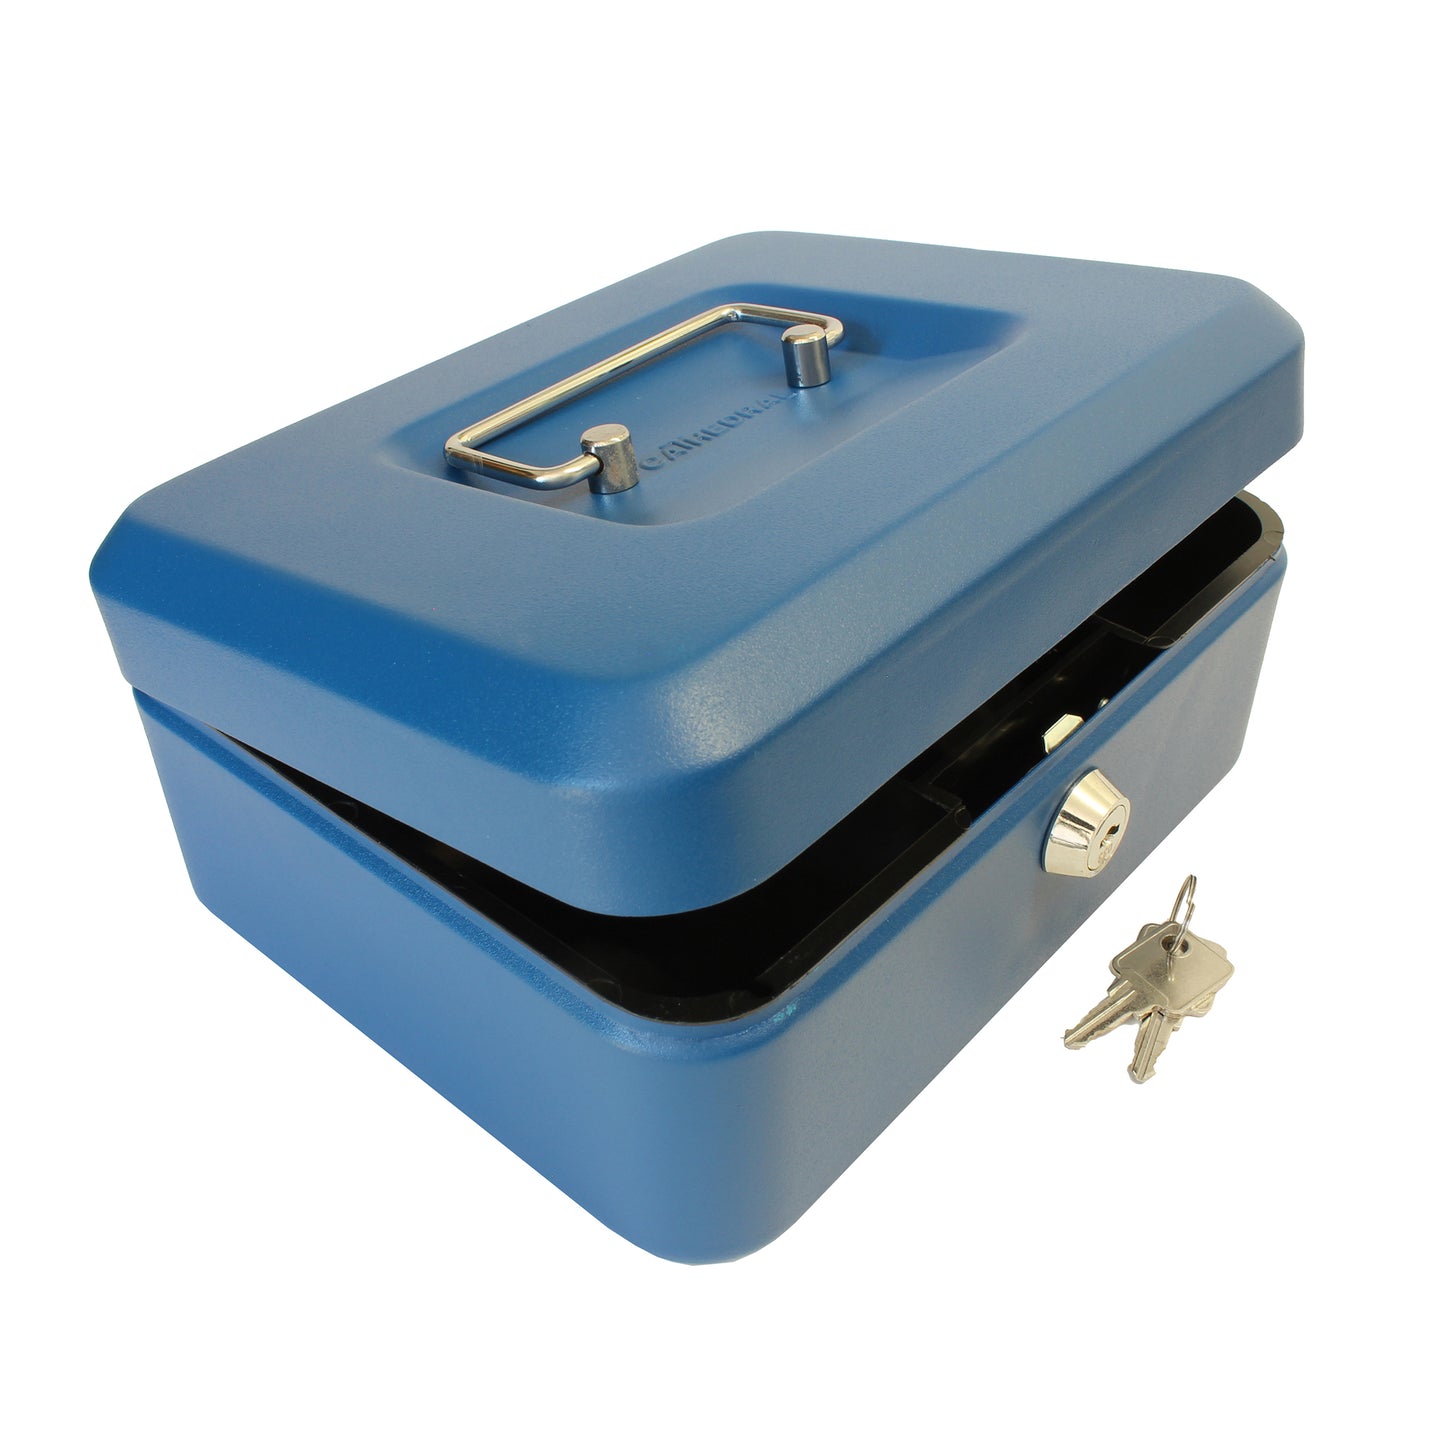 A partially open matte blue 8-inch key lockable cash box. The box features a sturdy metal handle and a secure lock at the front for safekeeping of cash and coins. A set of 2 keys on a ring is shown in front of the cash box.